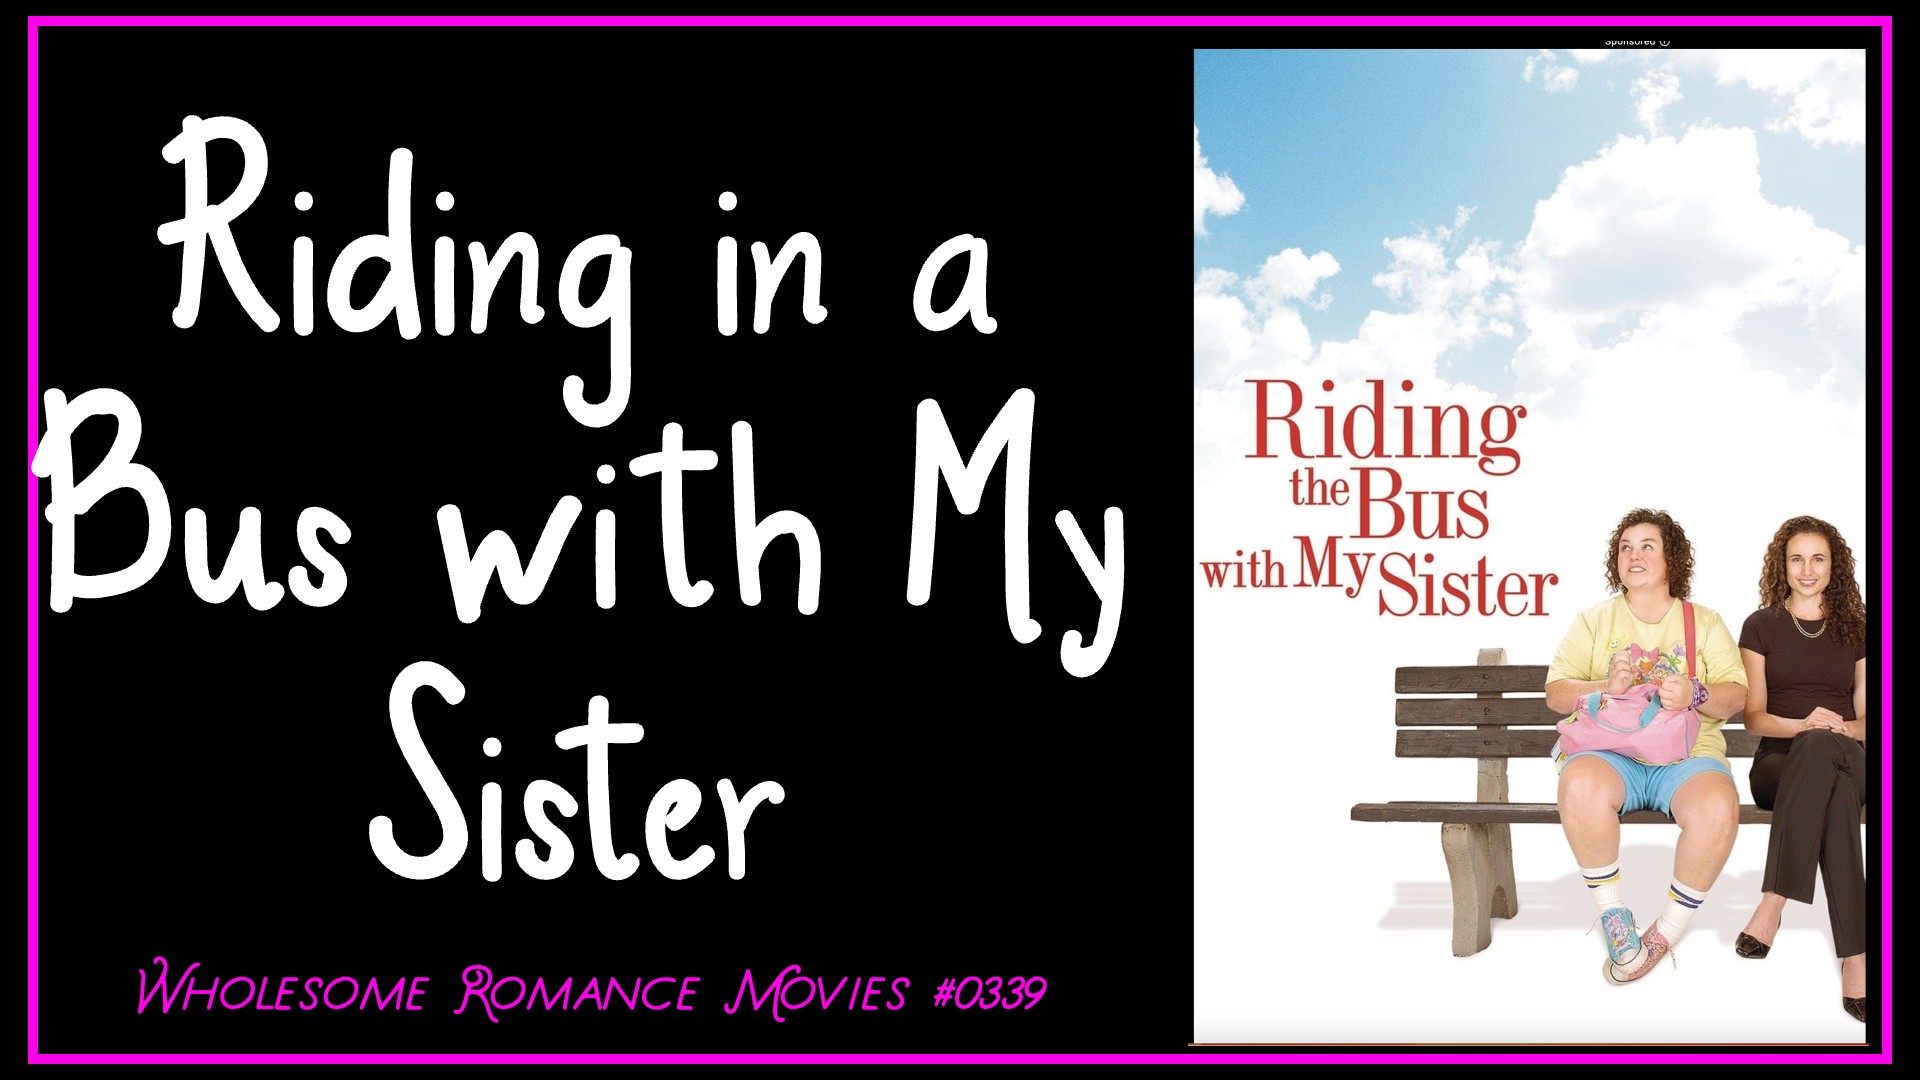 Riding in a Bus with My Sister (2005) WRM Review